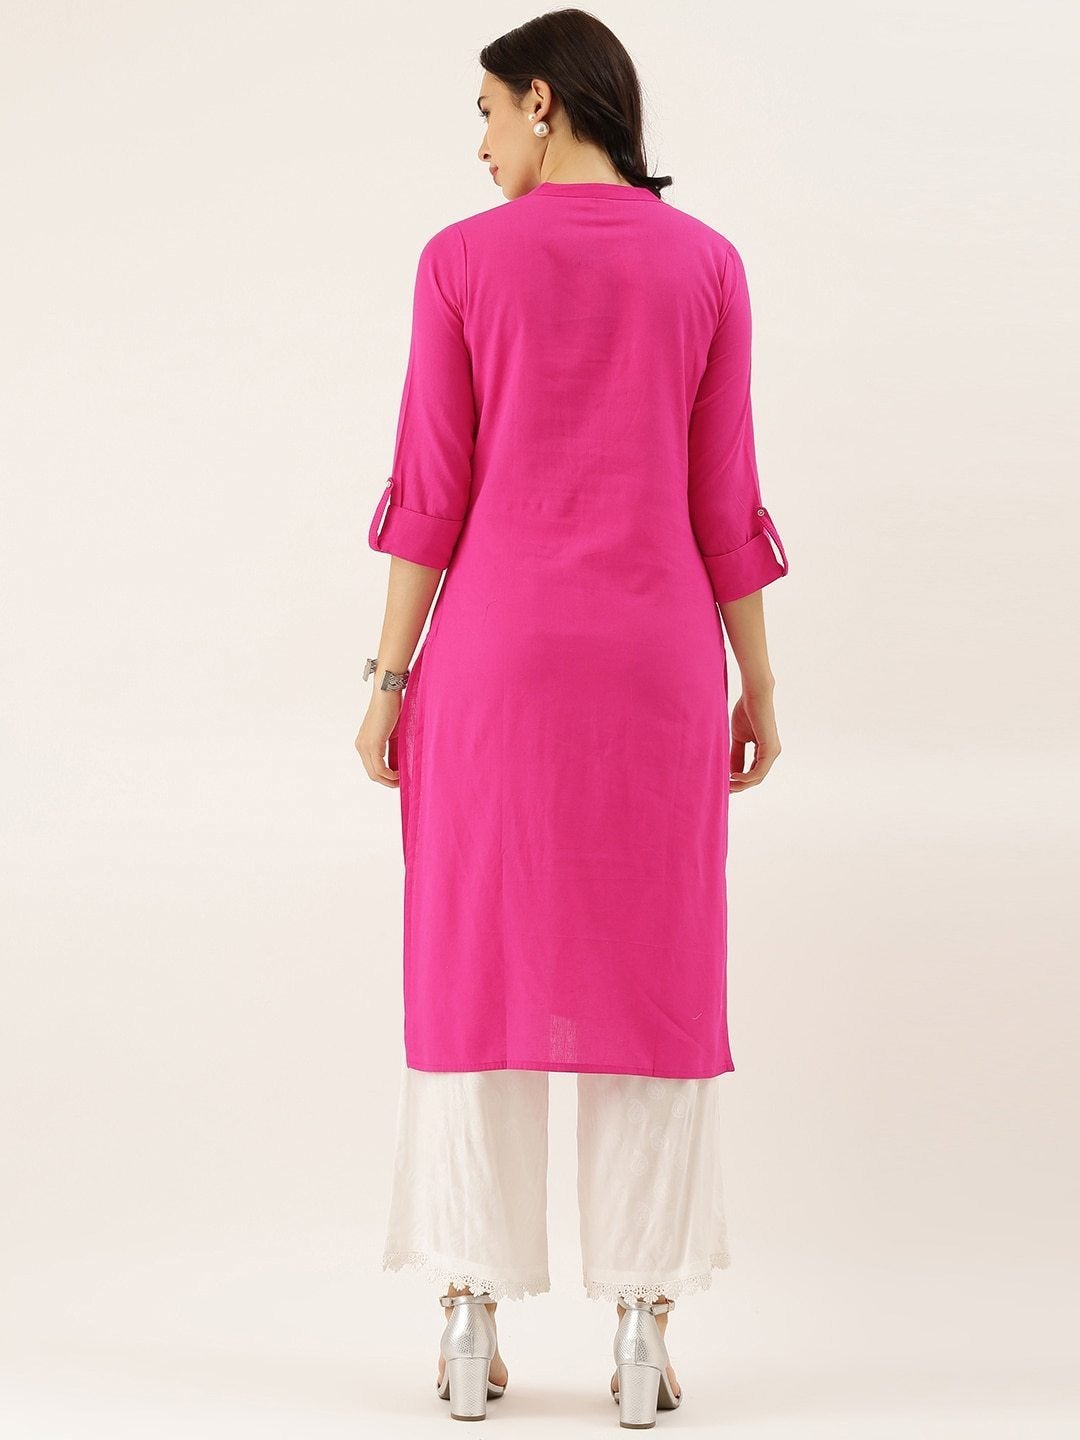 Women's Pink Solid Straight Roll up Sleeve Kurti - Divena